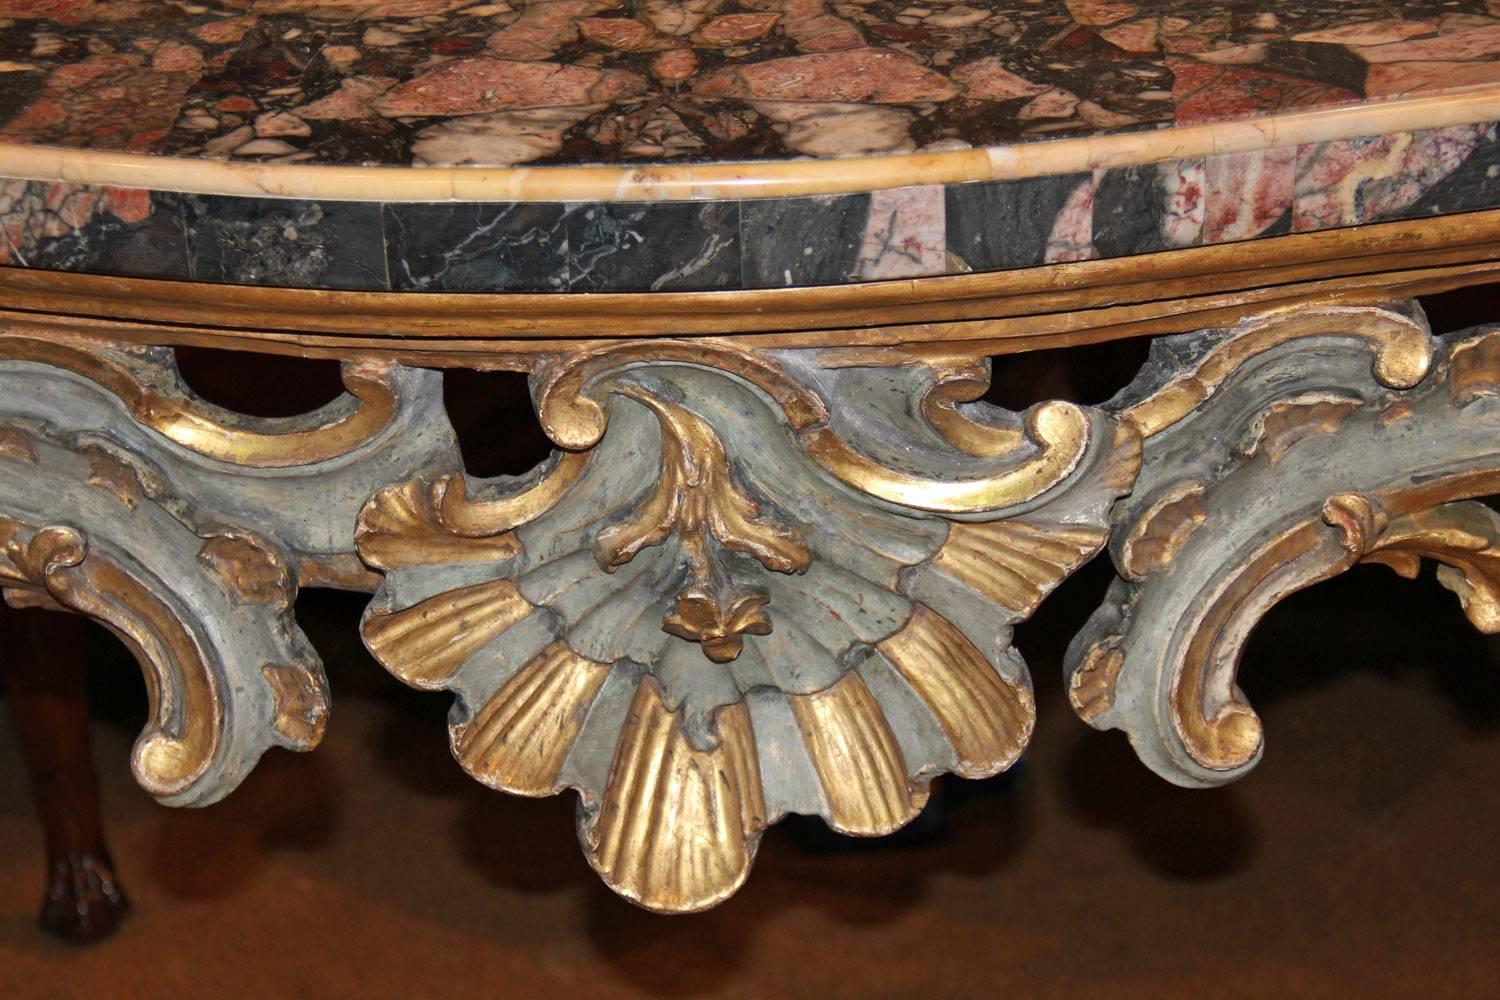 An 18th century Venetian pale blue polychrome and parcel-gilt console retaining its original marble top in hues of pink, red, gray, and white and with a Siena marble edge, above a carved apron centered by scallop shell and rocaille motifs, the four